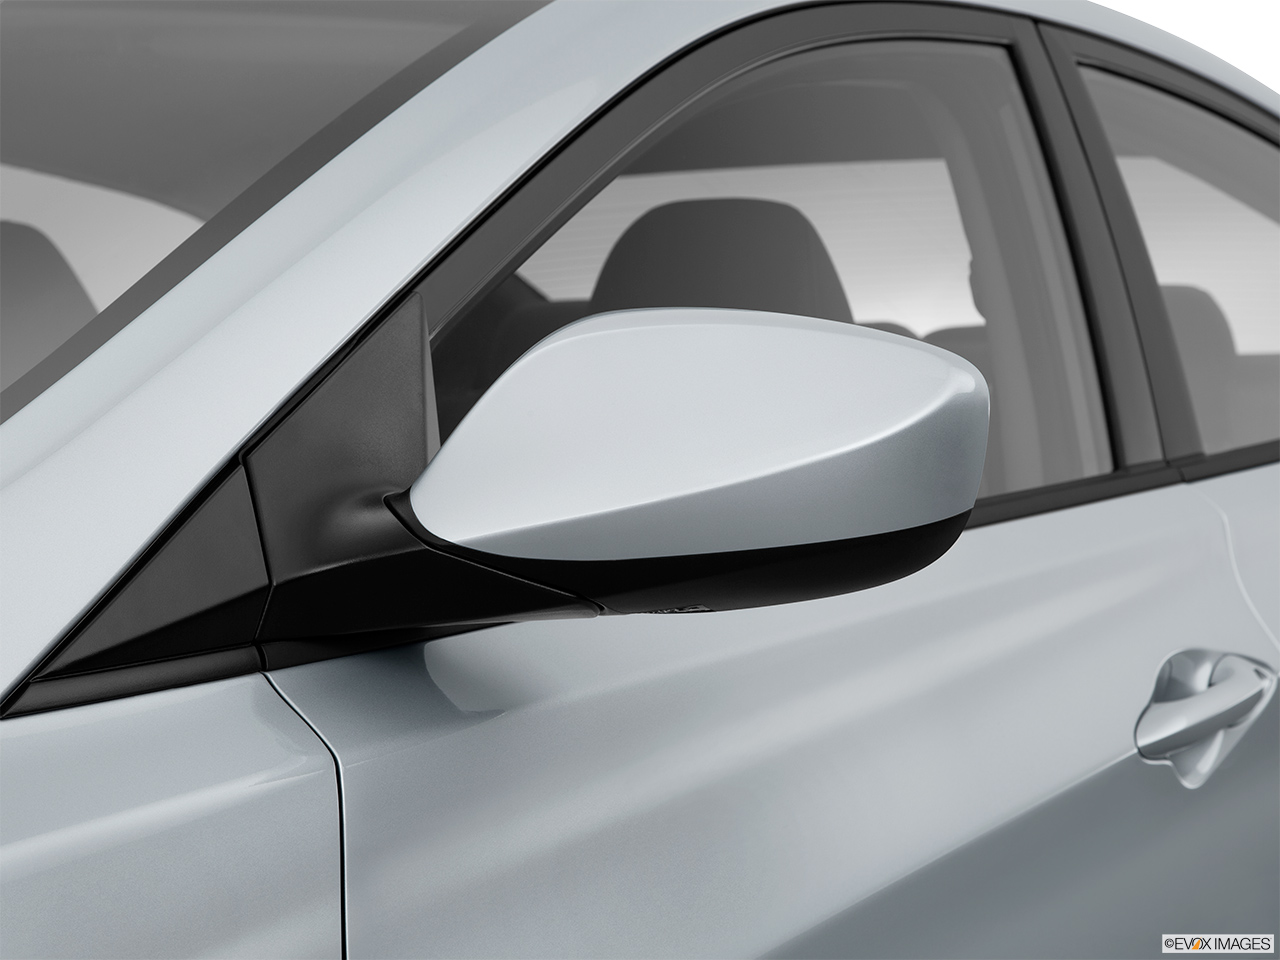 New Replacement Mirror Glass with FULL SIZE ADHESIVE for Hyundai Elantra Passenger Side View Right RH 